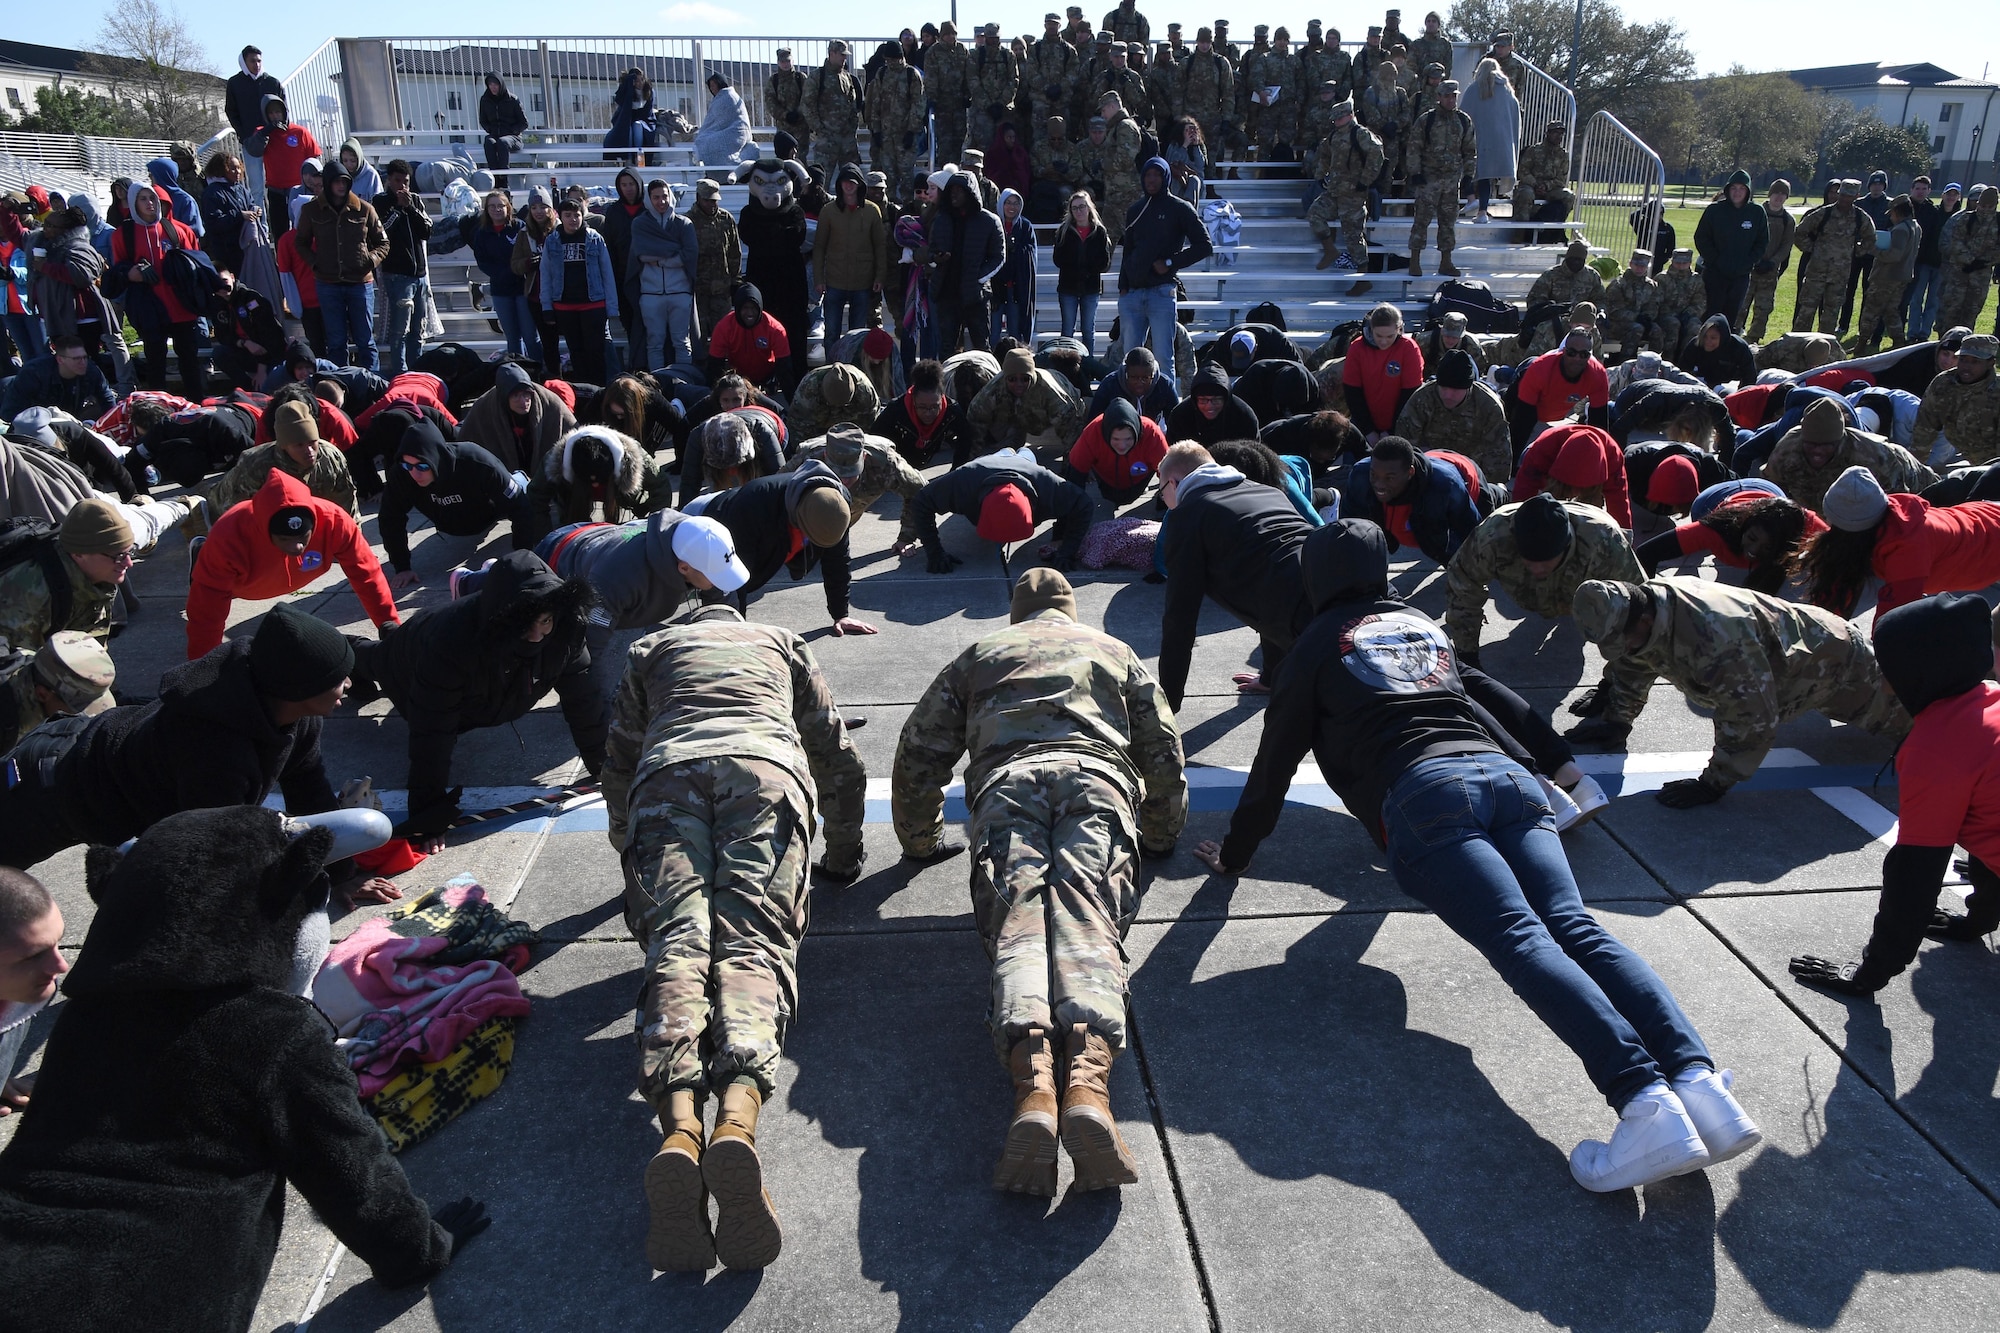 Airmen from the 335th Training Squadron do victory push-ups following the announcement that the 335th TRS placed first overall during the 81st Training Group drill down on the Levitow Training Support Facility drill pad at Keesler Air Force Base, Mississippi, Feb. 21, 2020. Airmen from the 81st TRG competed in a quarterly open ranks inspection, regulation drill routine and freestyle drill routine. Keesler trains more than 30,000 students each year. While in training, Airmen are given the opportunity to volunteer to learn and execute drill down routines. (U.S. Air Force photo by Kemberly Groue)